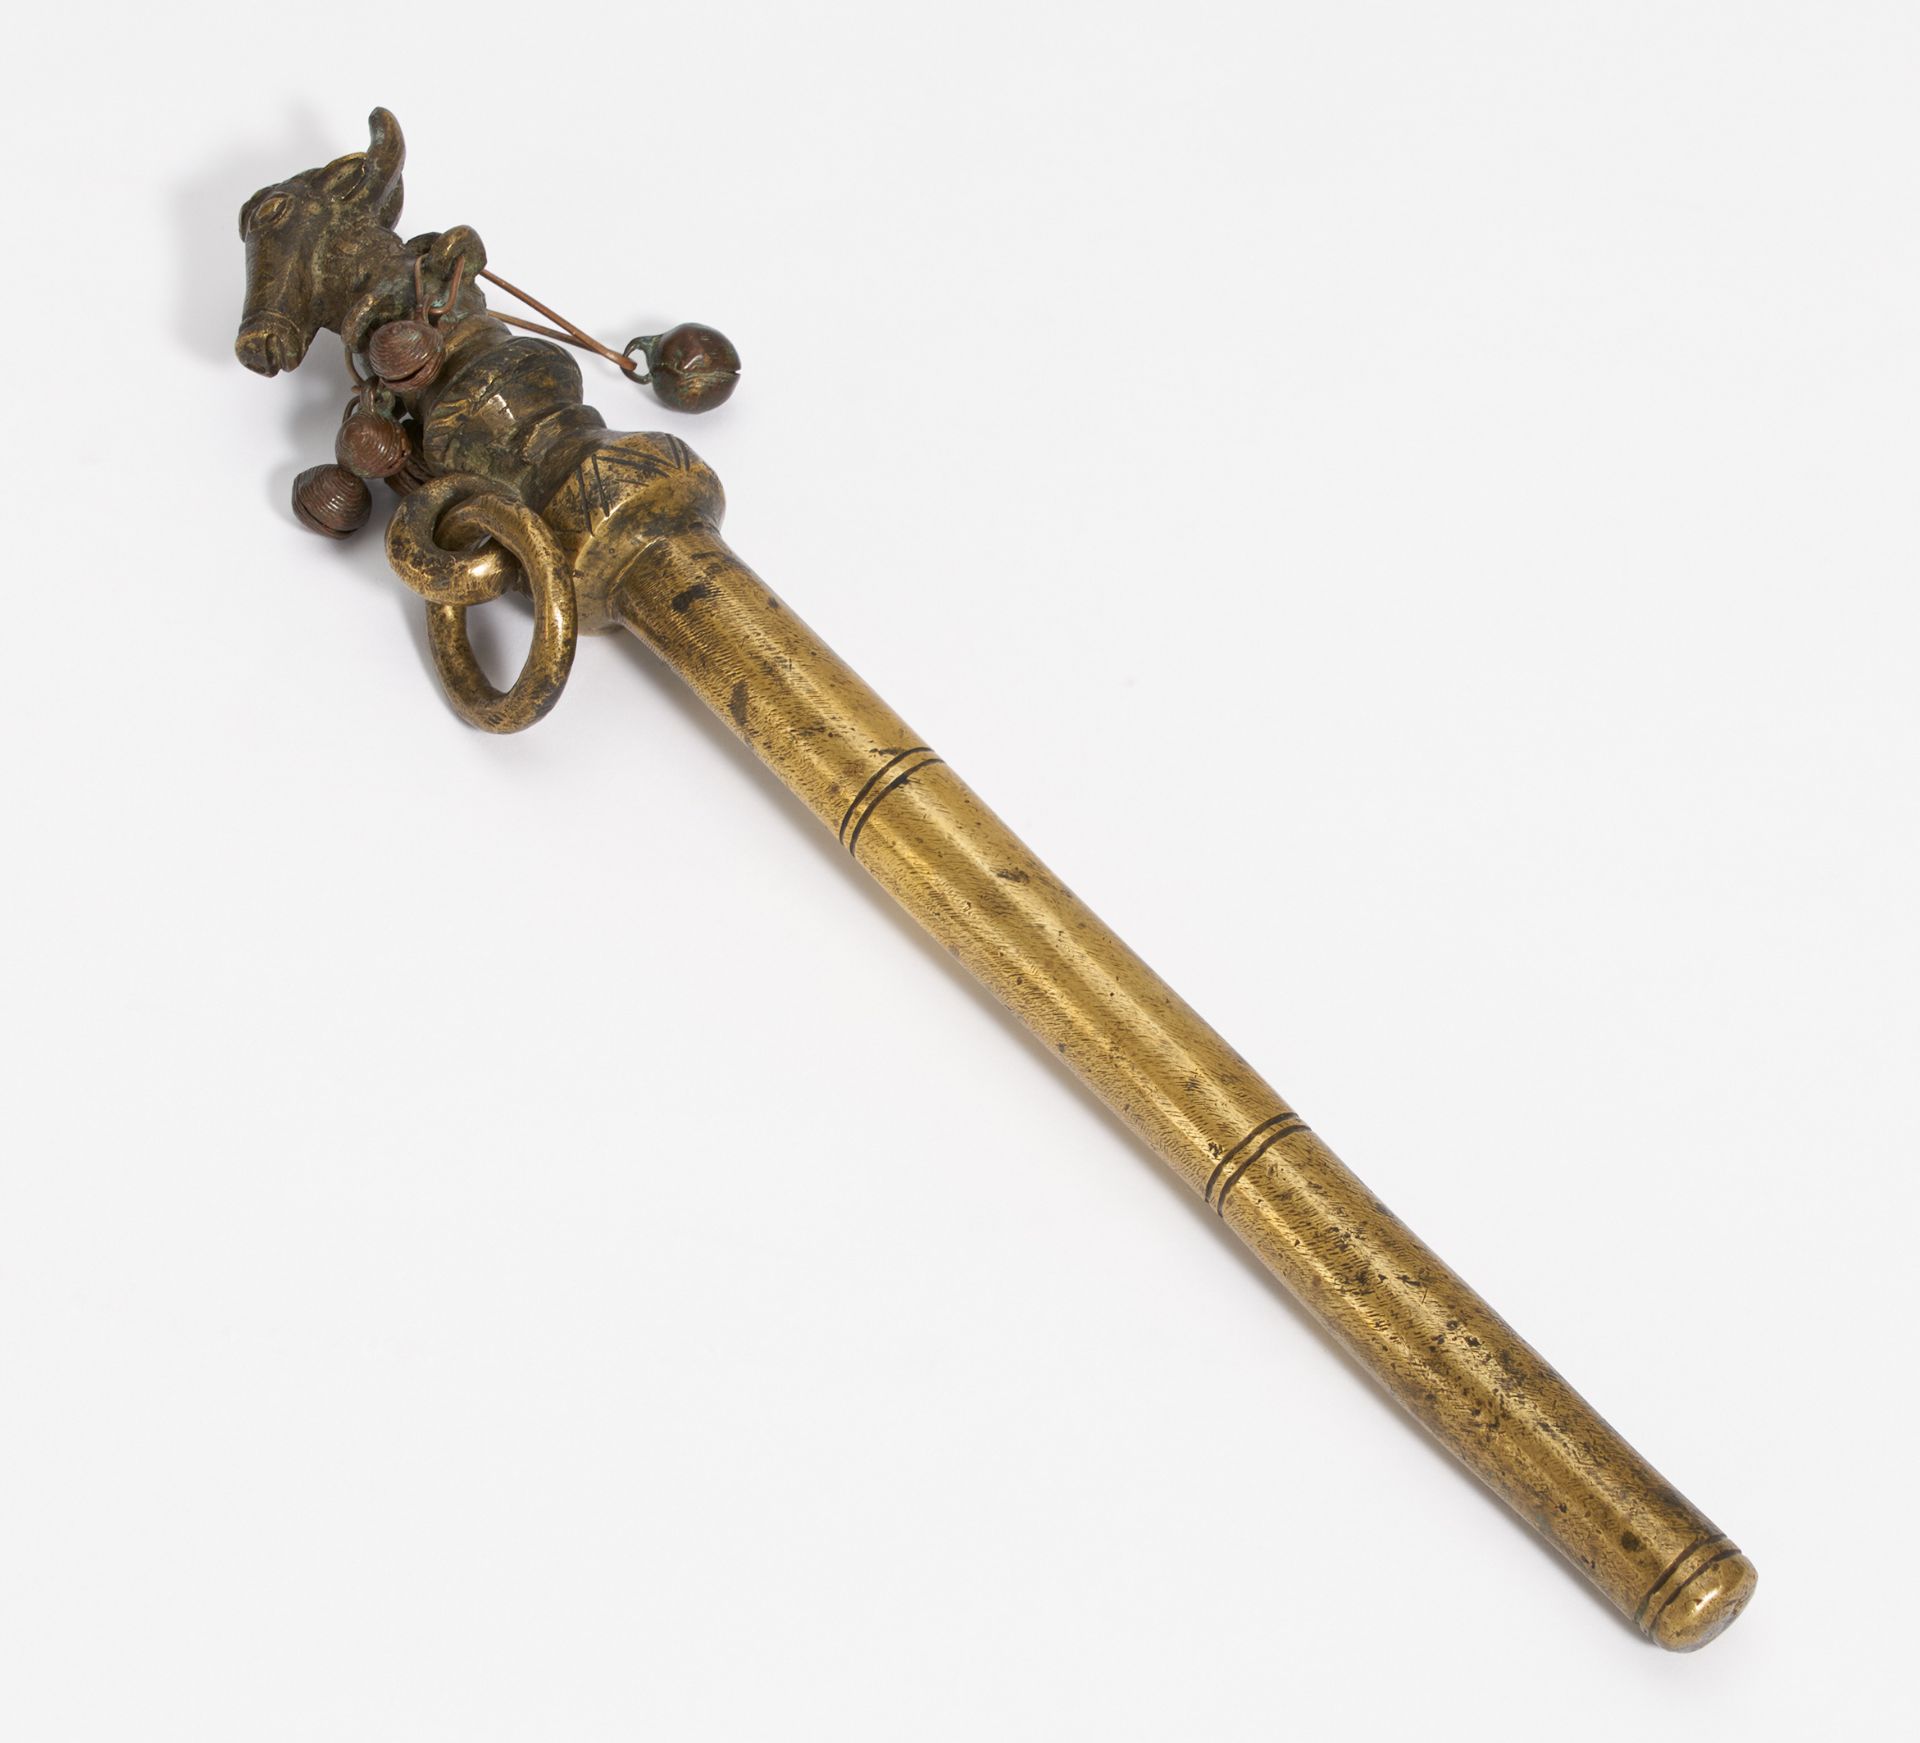 A RATTLE BATON WITH RAMS HEAD. India. 18th-19th c. Bronze. Upper part with dark patina, at the